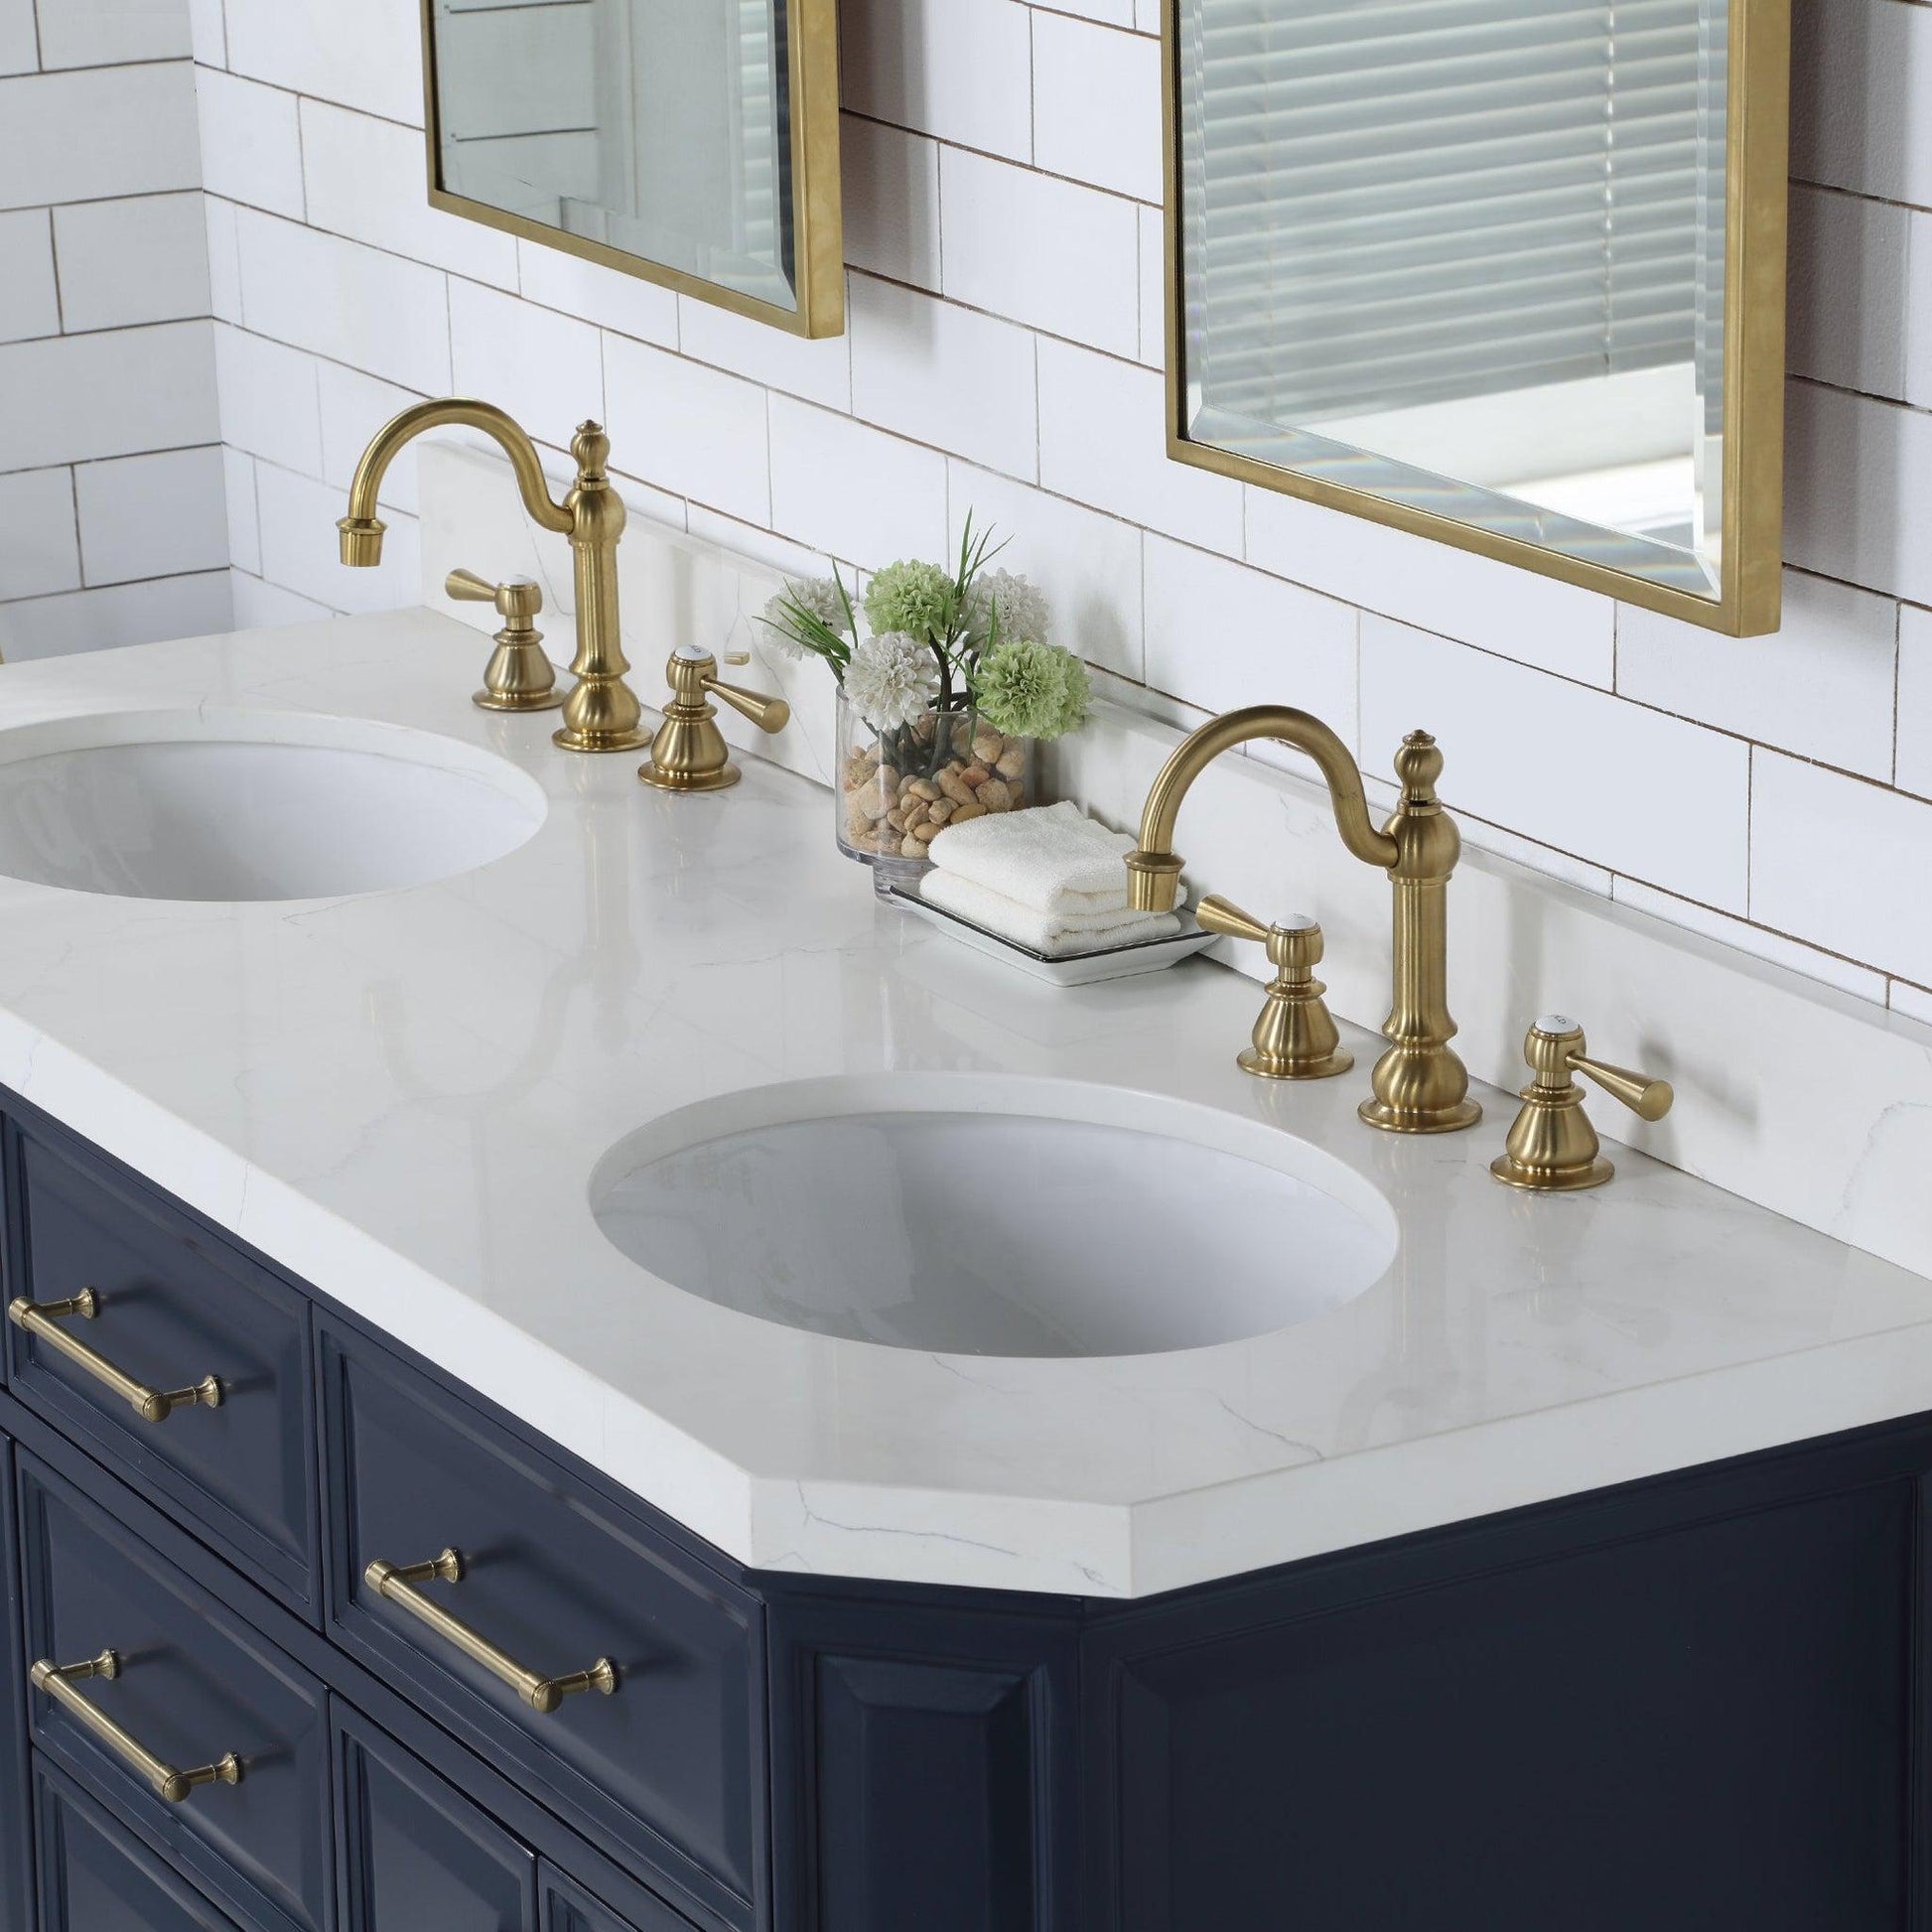 Water Creation Palace 60" Double Sink White Quartz Countertop Vanity in Monarch Blue with HookFaucets and Mirrors